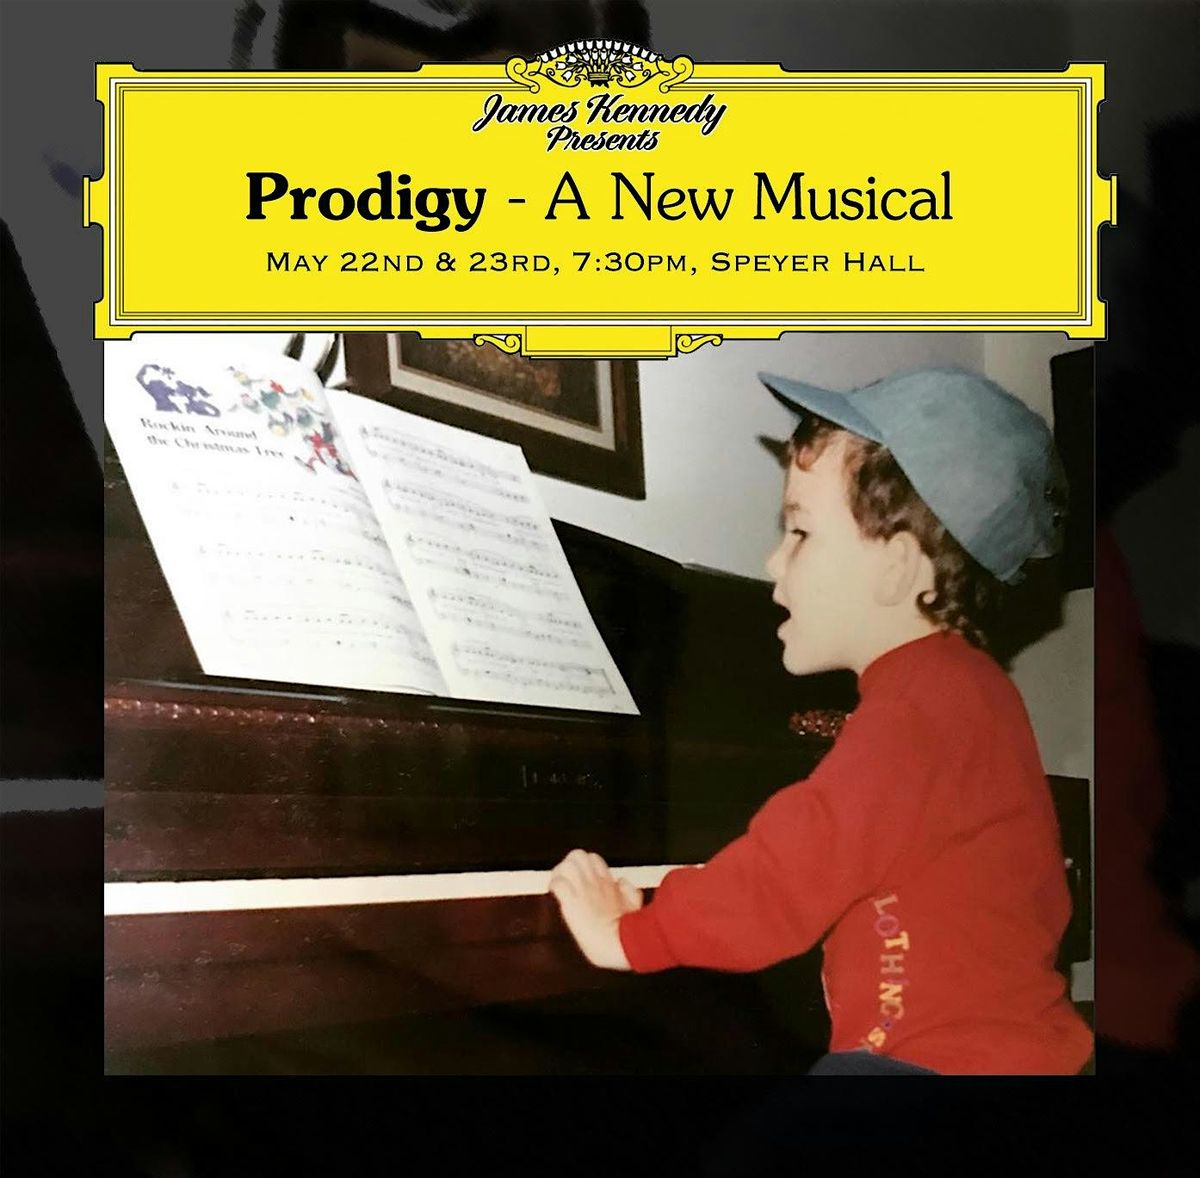 Prodigy - A New Musical